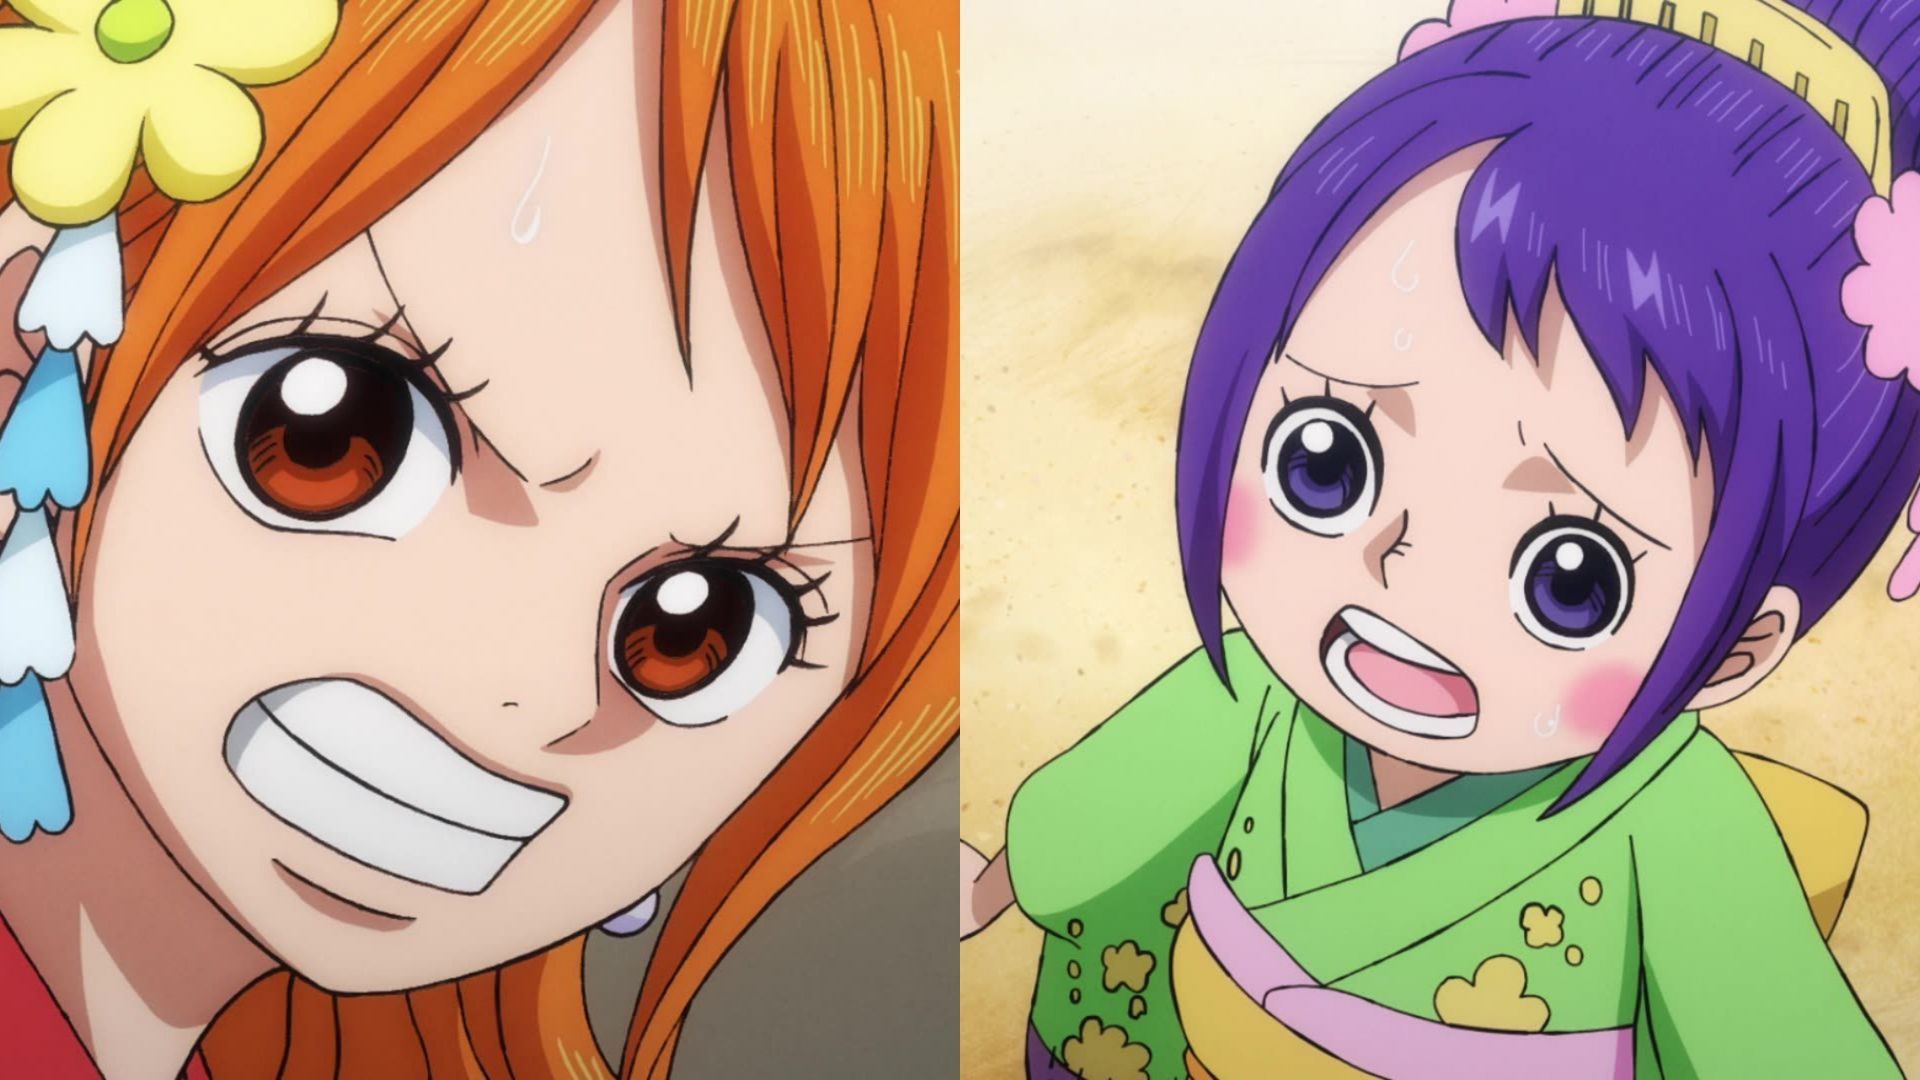 One Piece episode 1038 will give Nami and Otama their time in the spotlight (Image via Toei Animation)